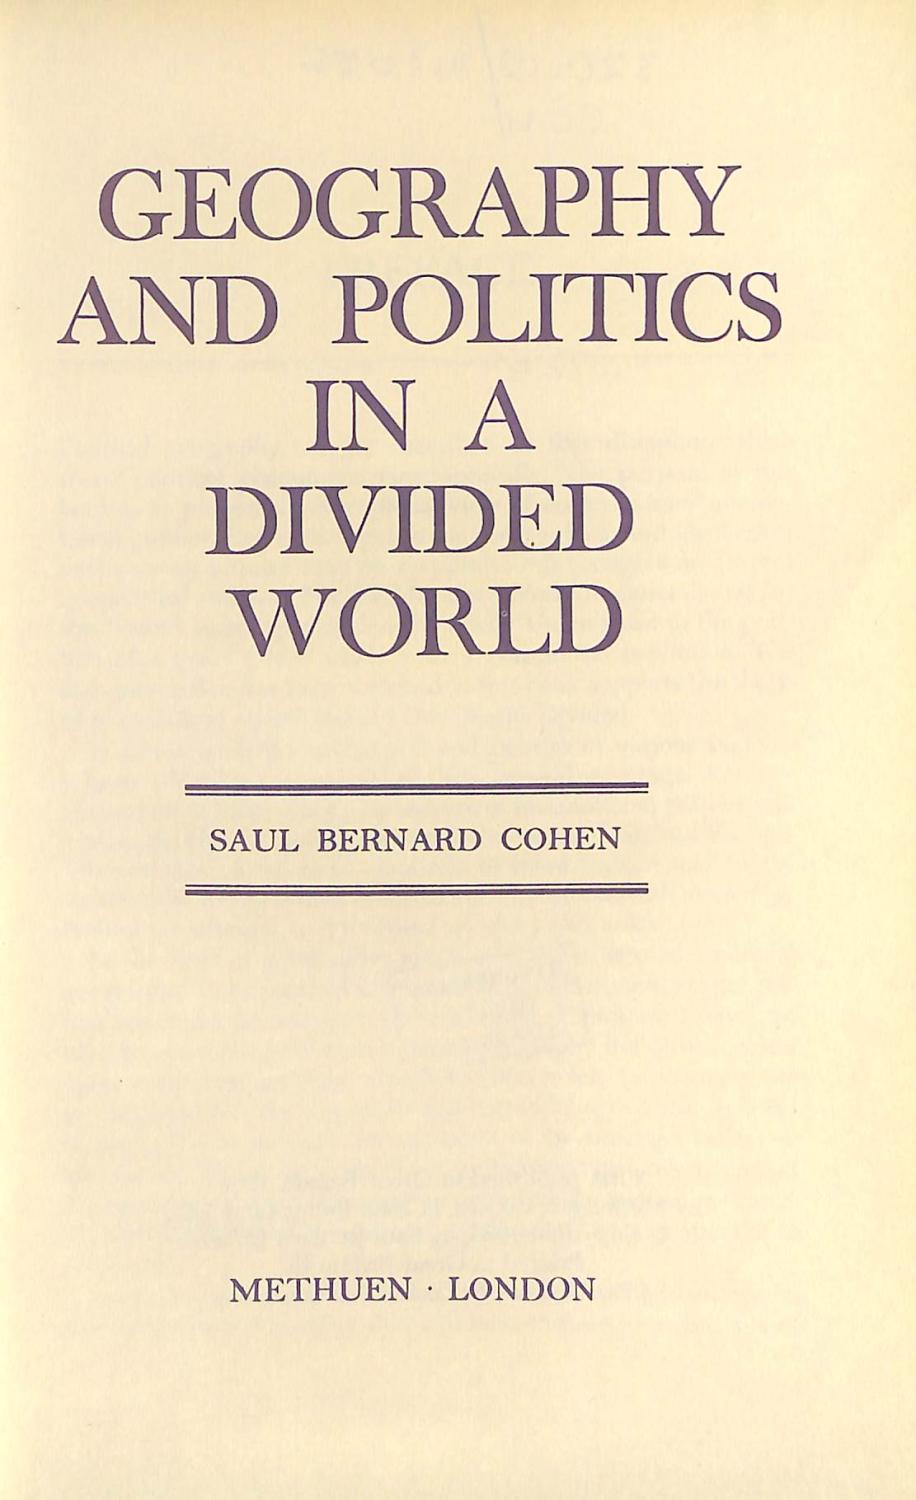 Geography and politics in a divided world - Cohen, Saul Bernard